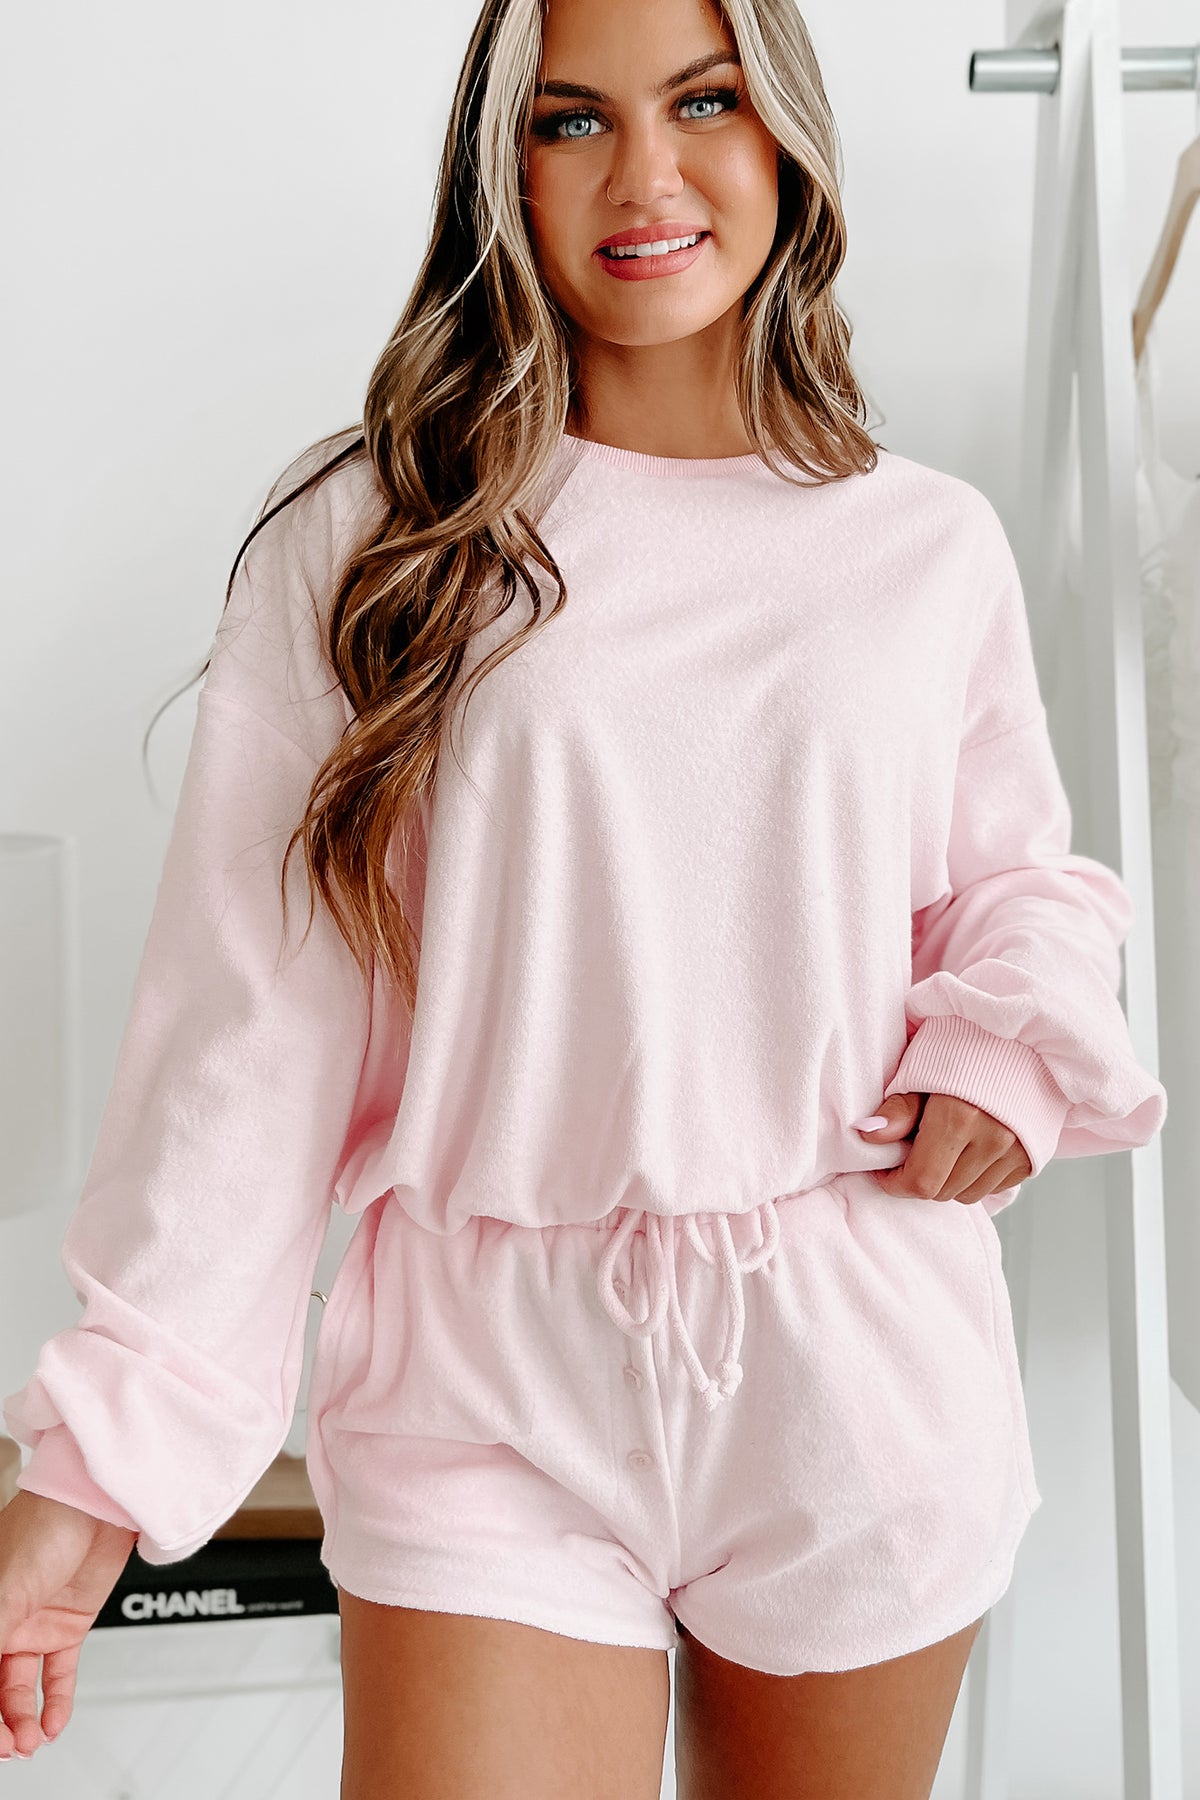 Cozy State Terry Knit Sweatshirt & Pink) Generis Sweet for (Light cost lower Look Get Set Shorts the